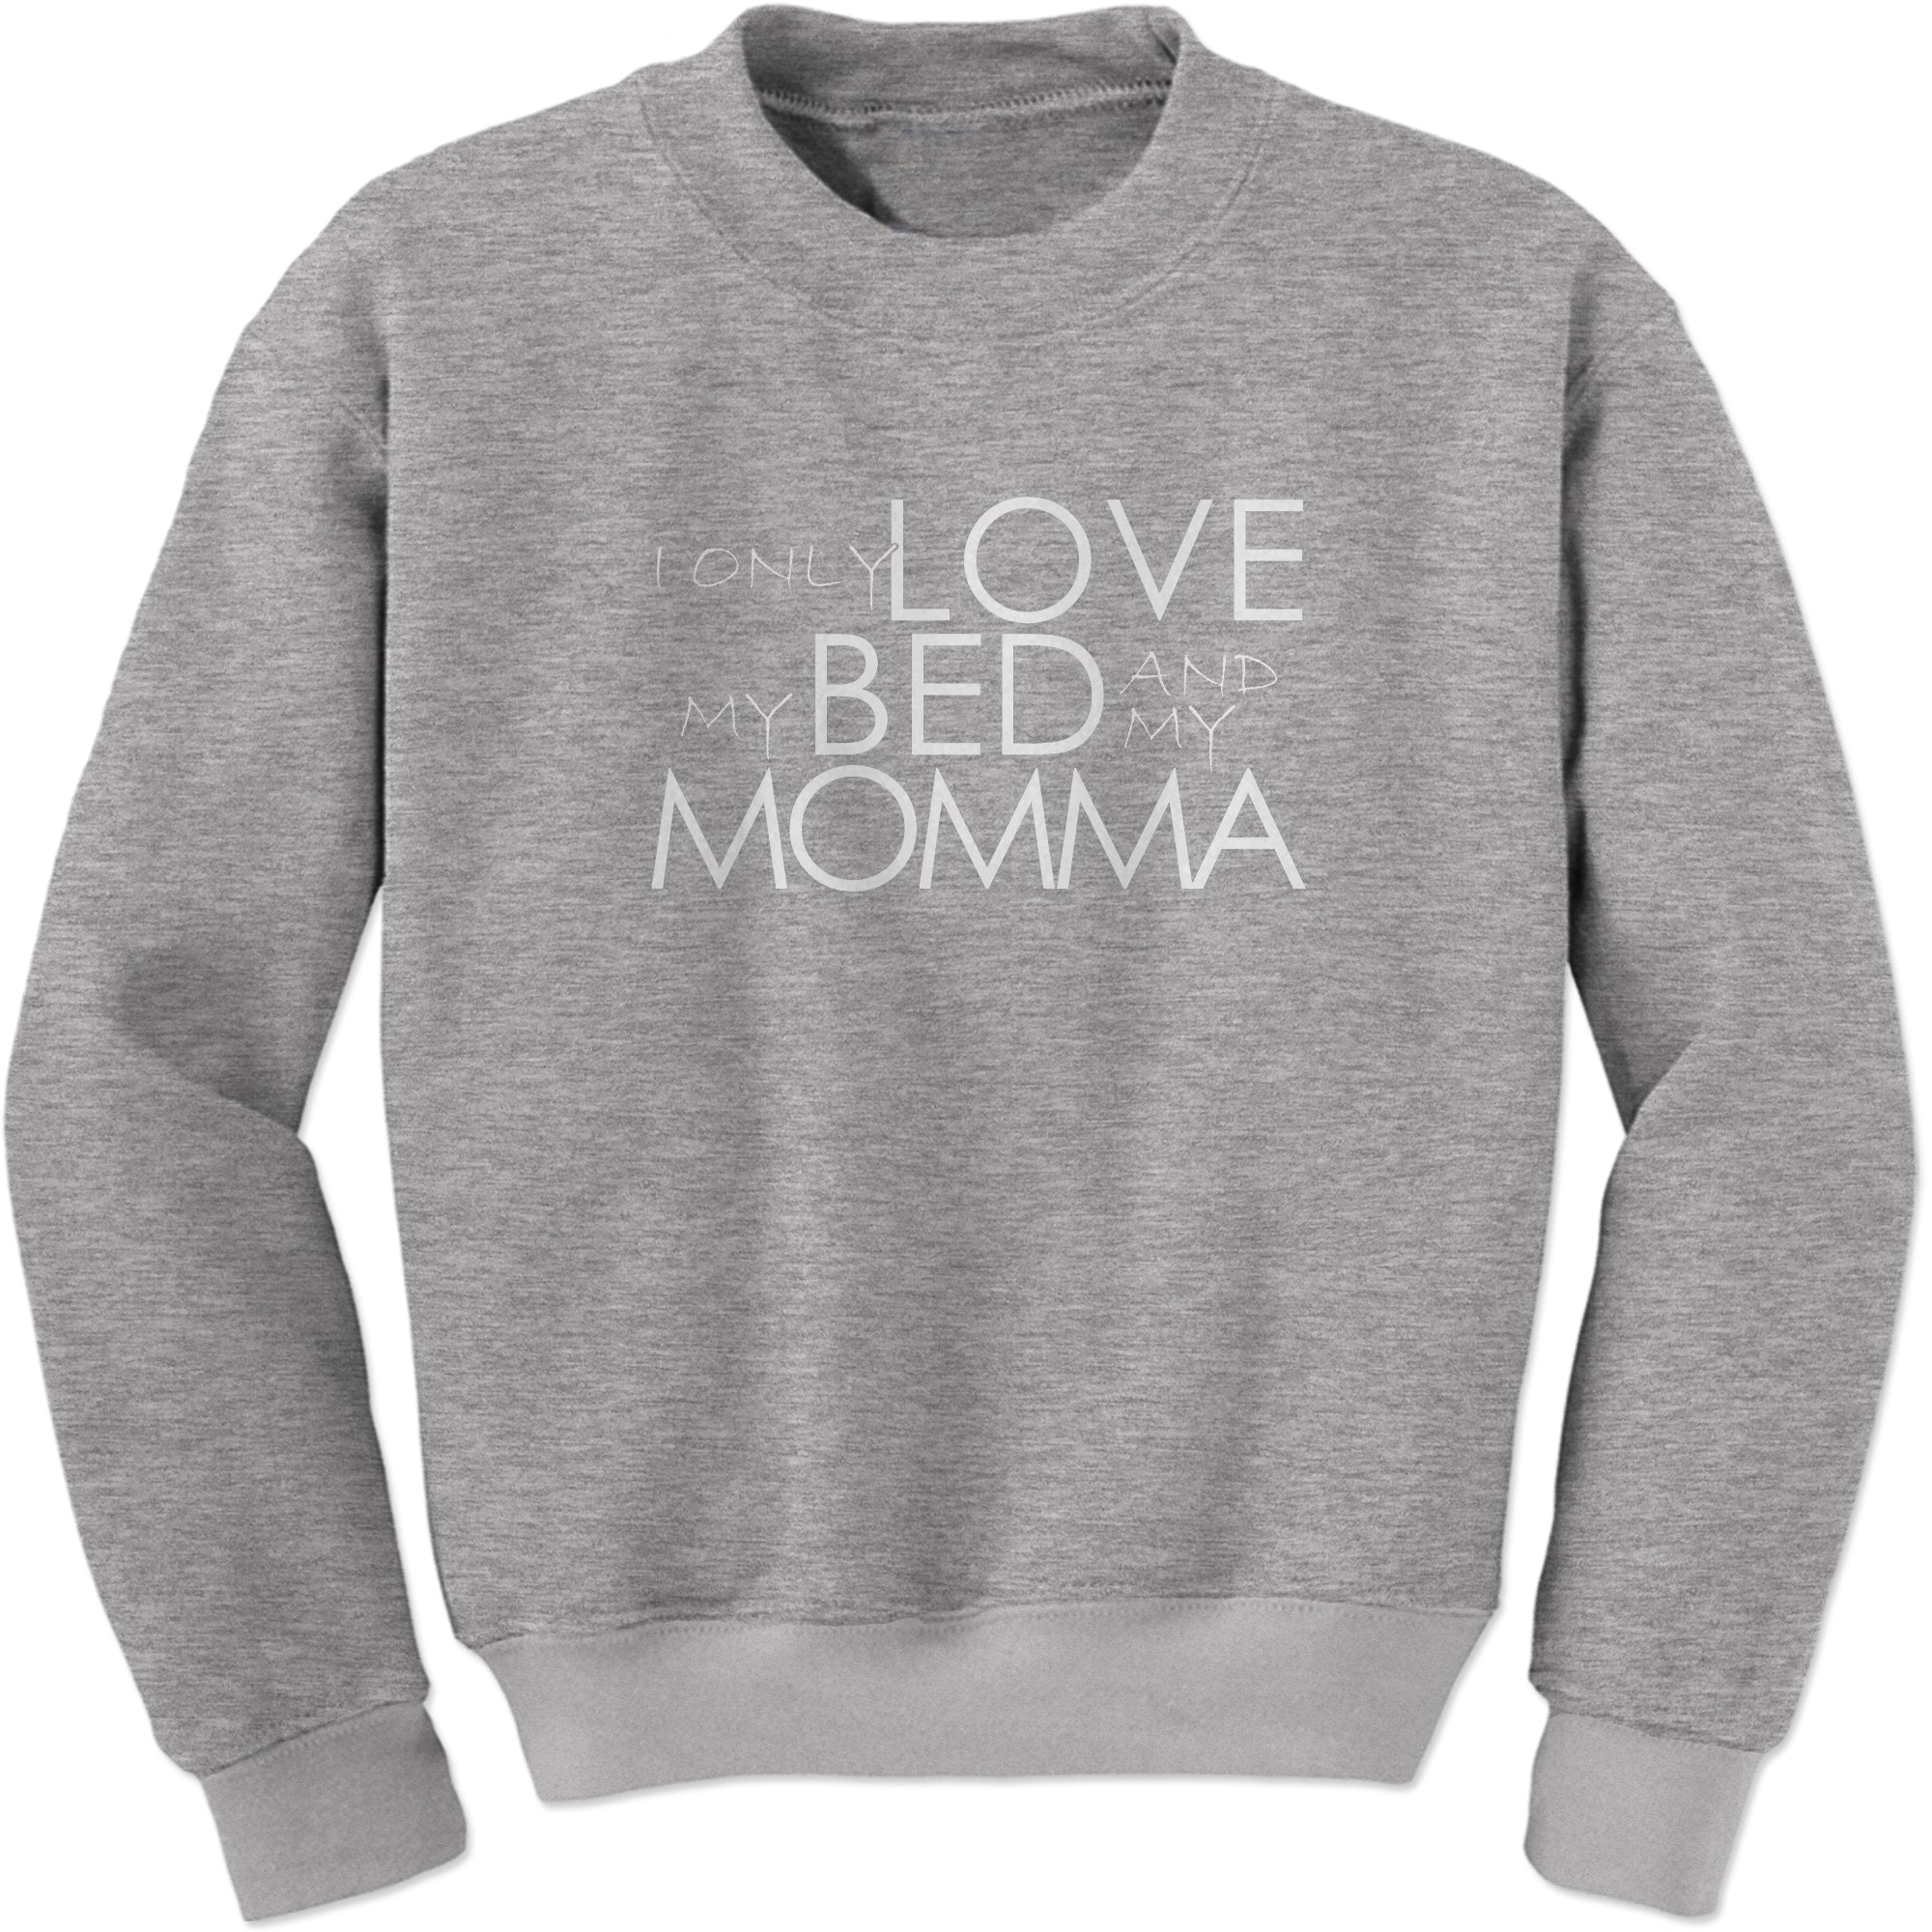 I Only Love My Bed And My Momma Sweatshirt